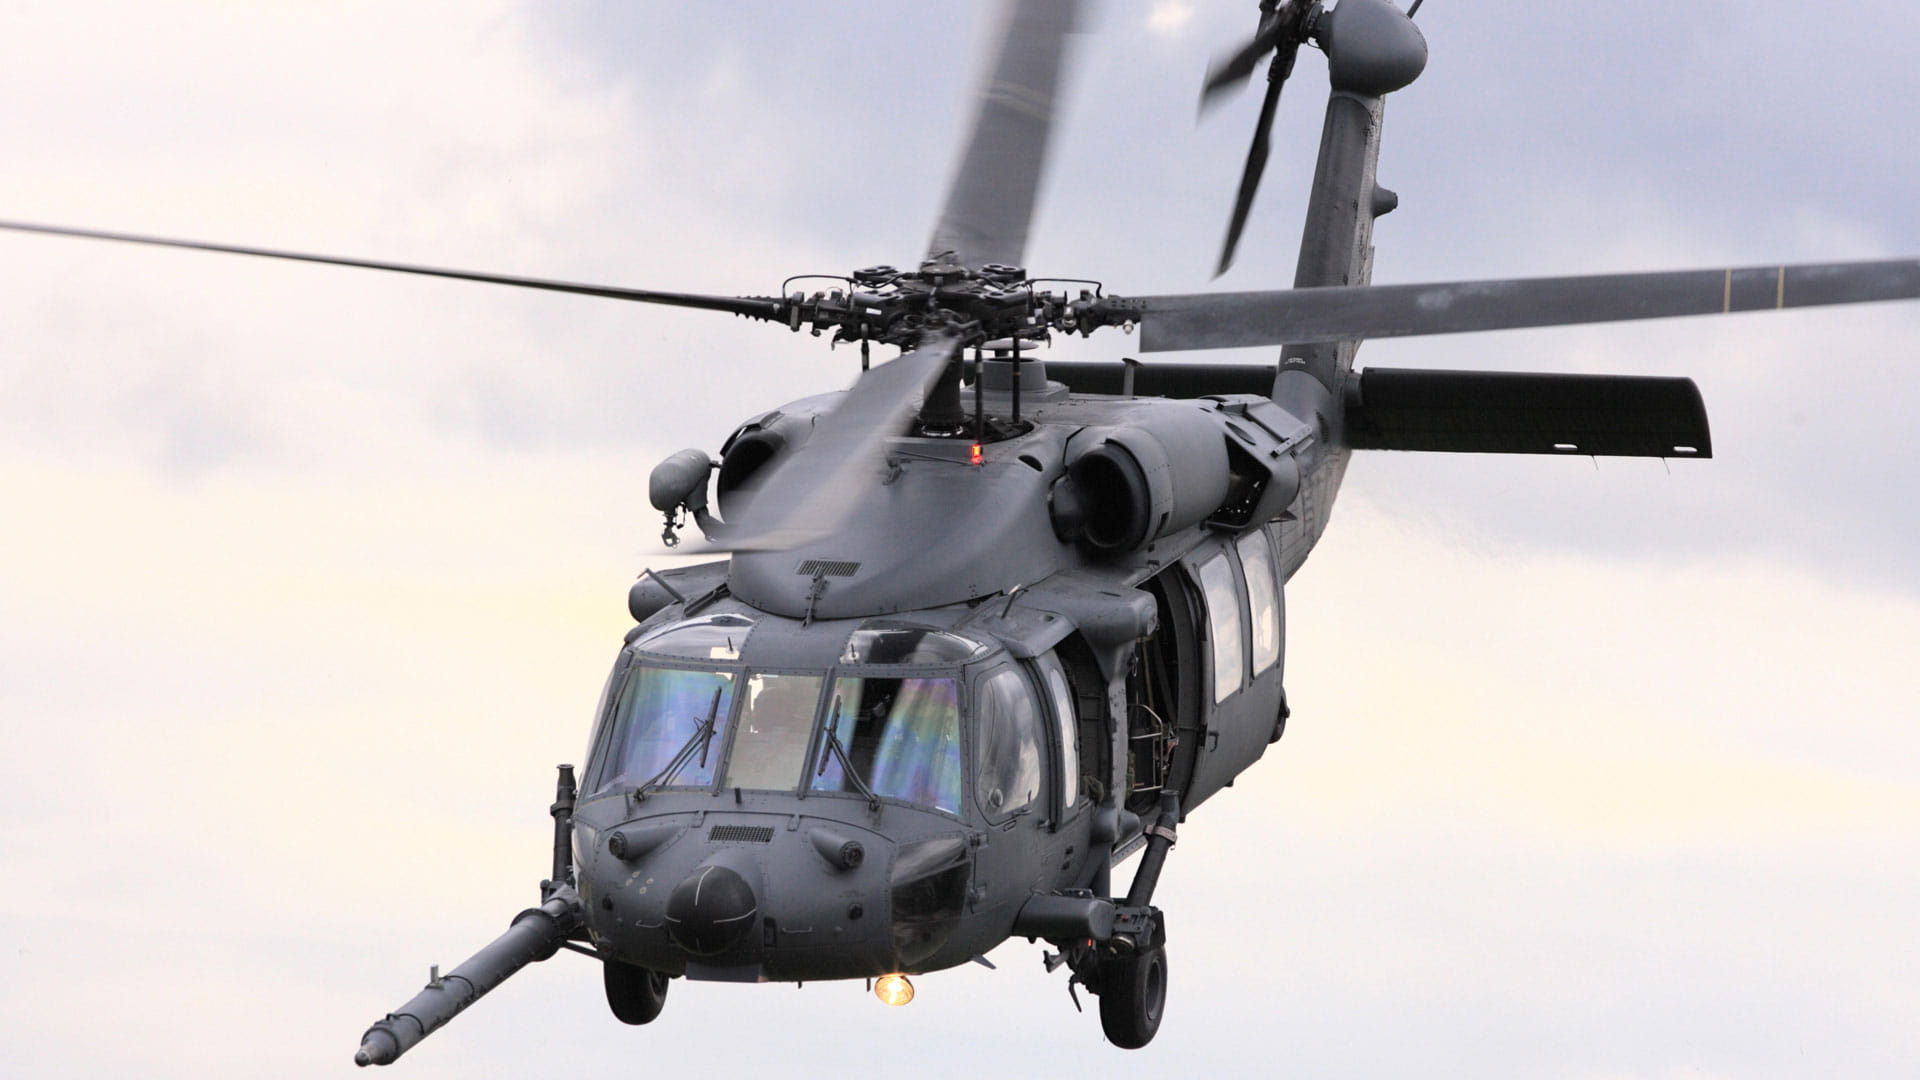 U.S. Air Force HH-60G Pave Hawk helicopter